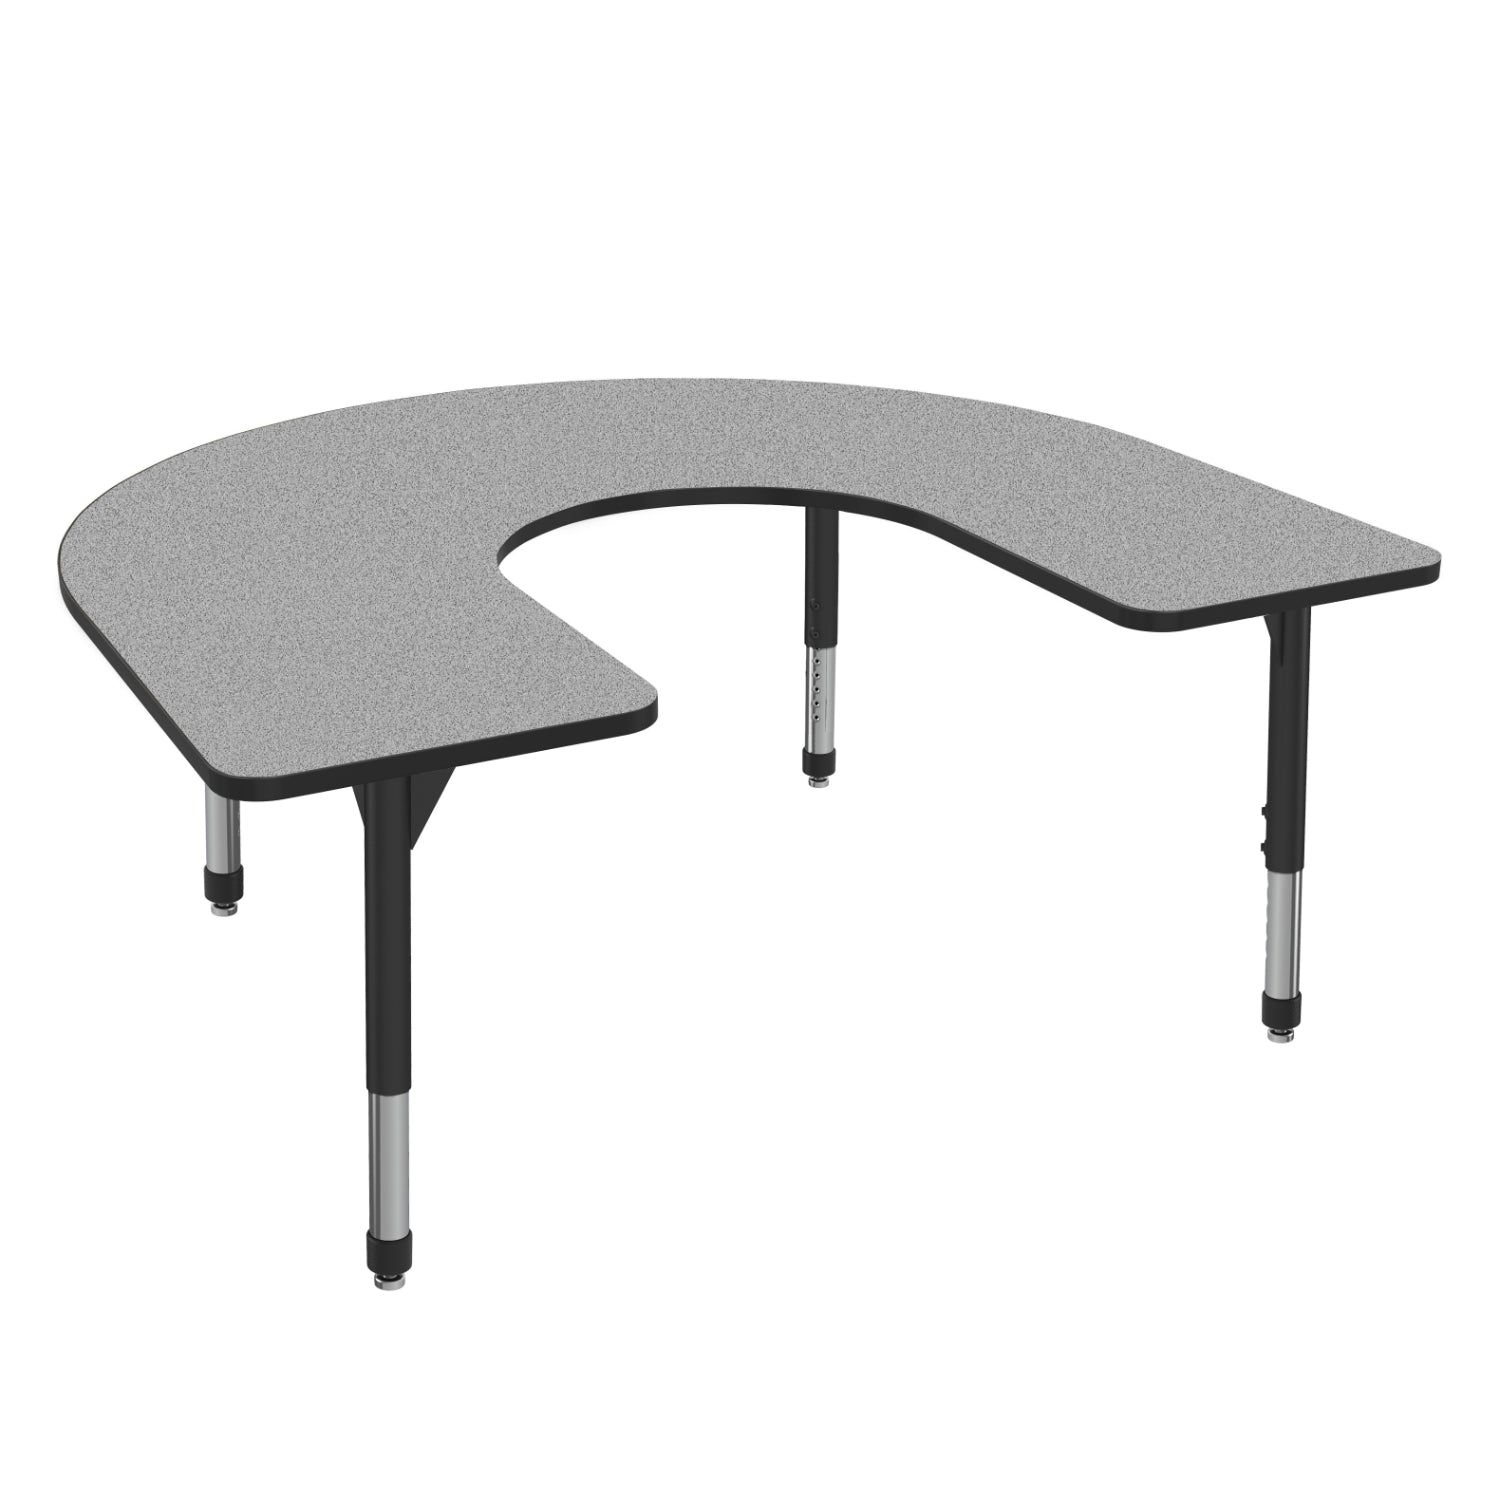 Premier Standing Height Collaborative Classroom Table, 60" x 66" Horseshoe